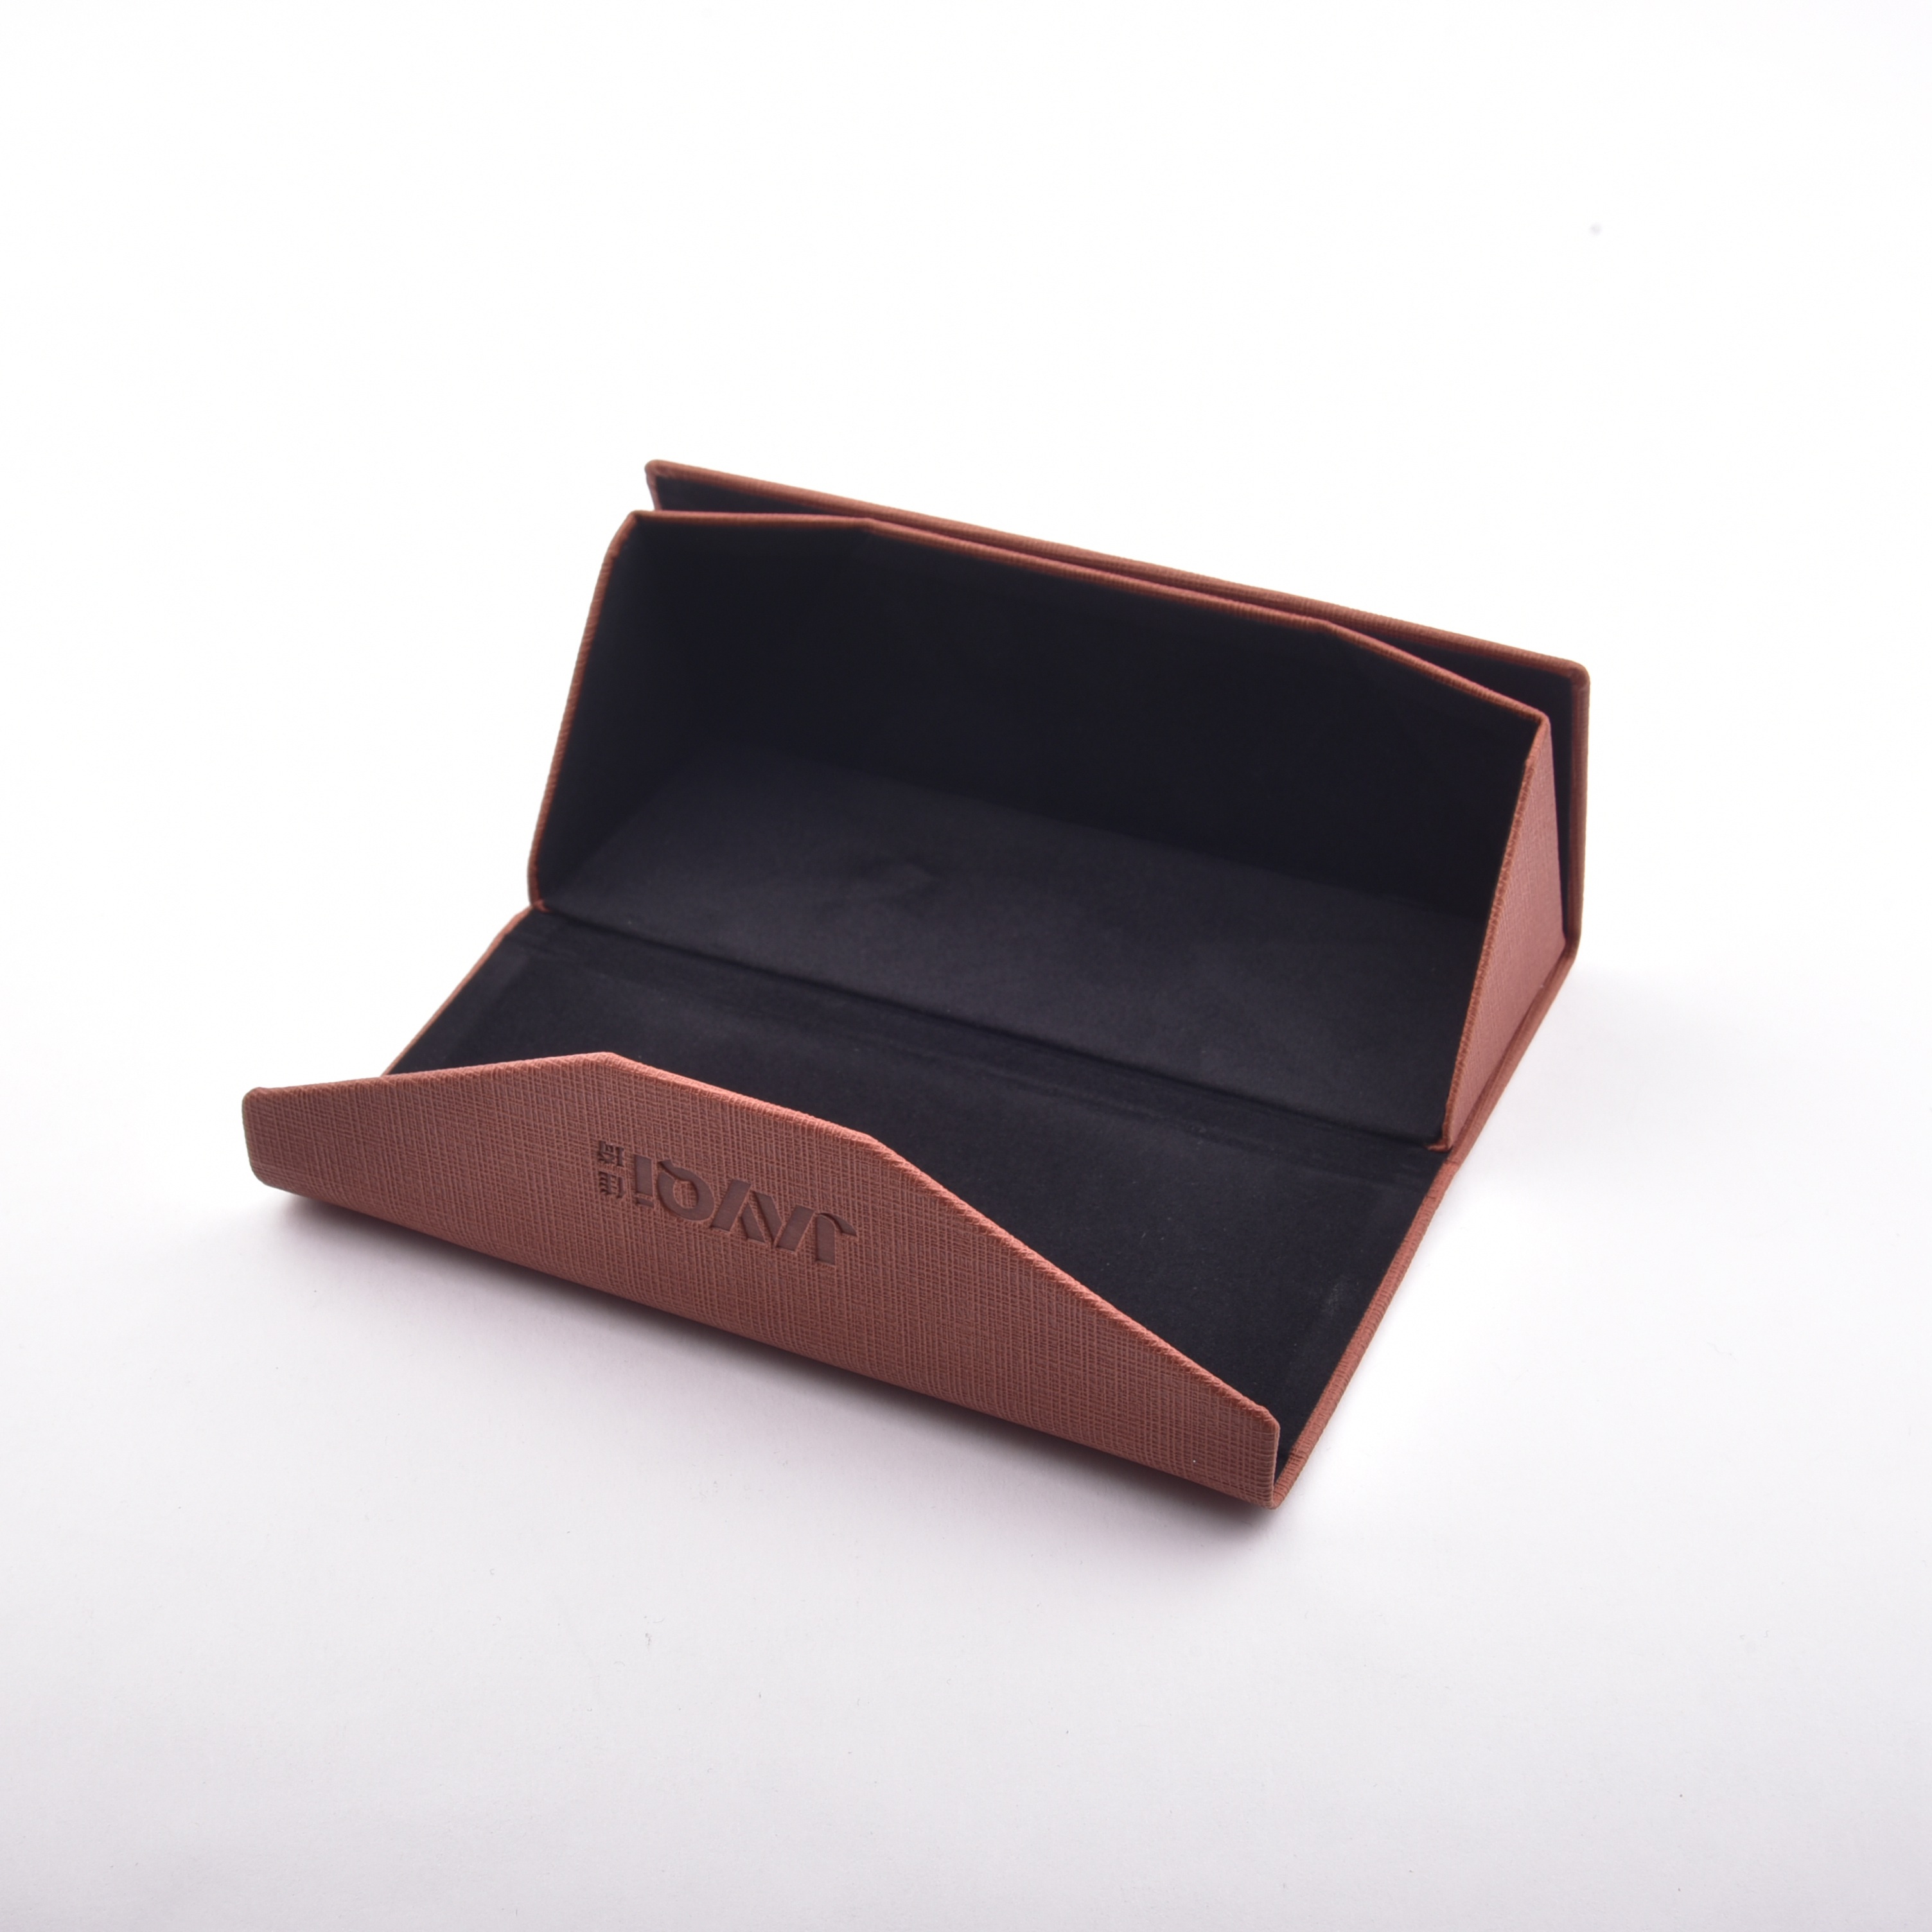 Wholesale High Quality Spectacle Case Folding Glasses Case